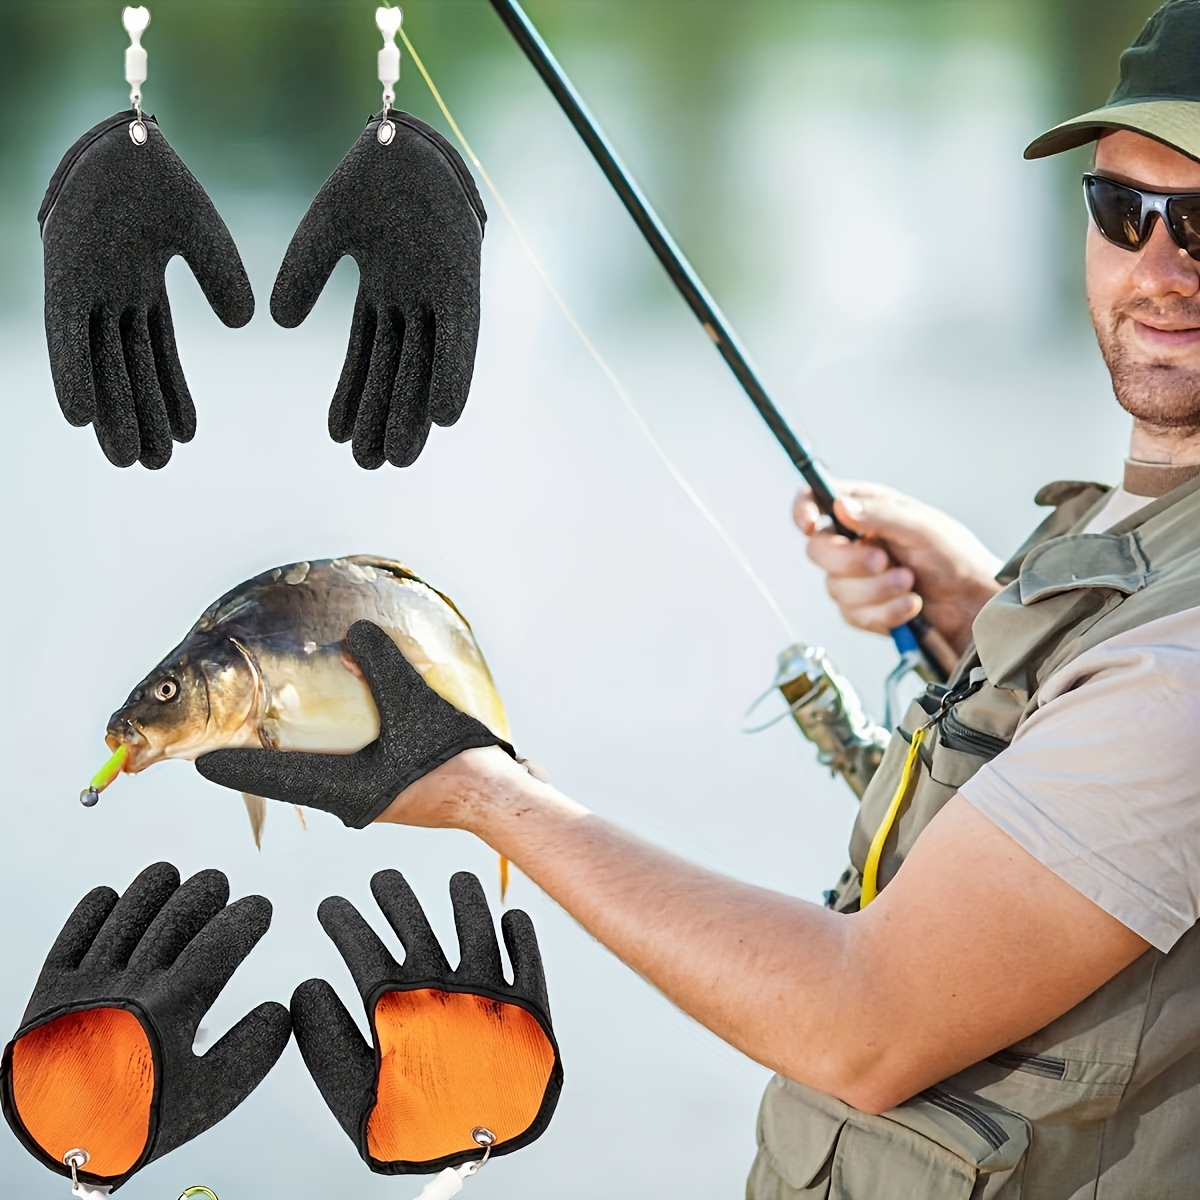 

1pc Fishing Catching Glove, Non-slip Rubber Glove For Fish Handling, Breathable Sea Fishing Glove For Anglers